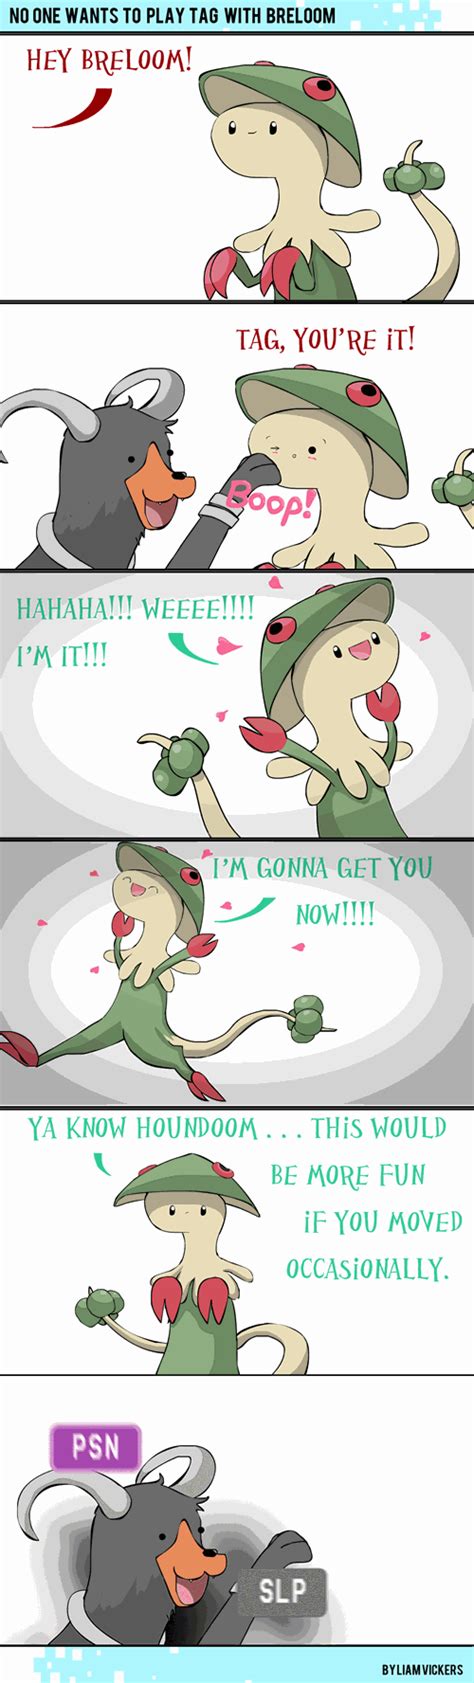 I Guess You Could Say A Game Like This Would Be Sporeing Lololol D Pokemon Comics Pokemon